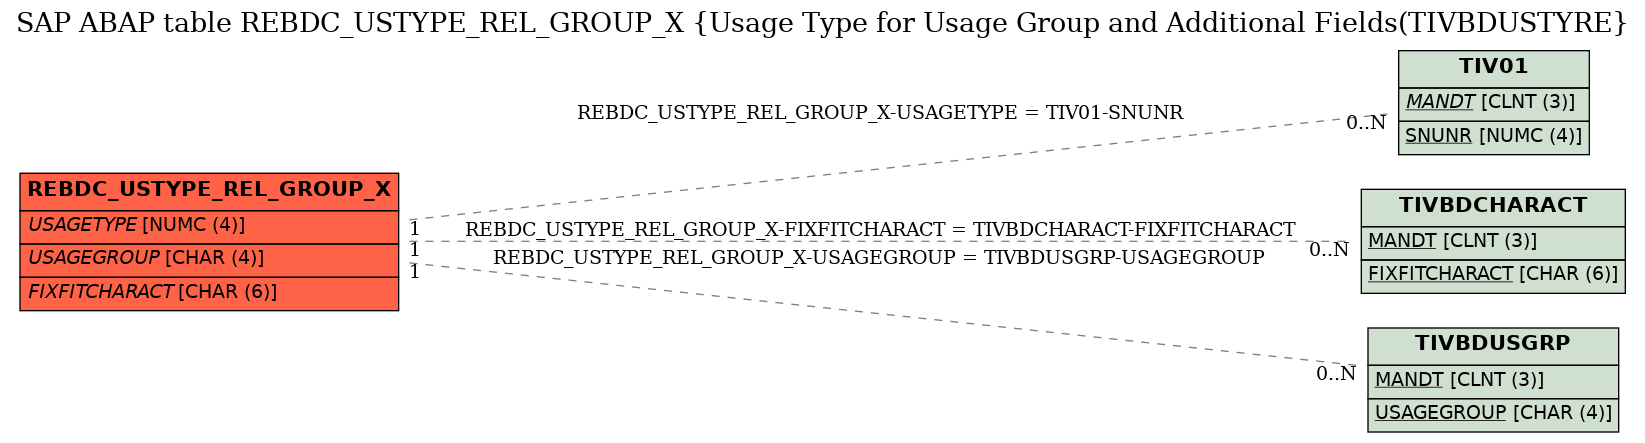 E-R Diagram for table REBDC_USTYPE_REL_GROUP_X (Usage Type for Usage Group and Additional Fields(TIVBDUSTYRE)